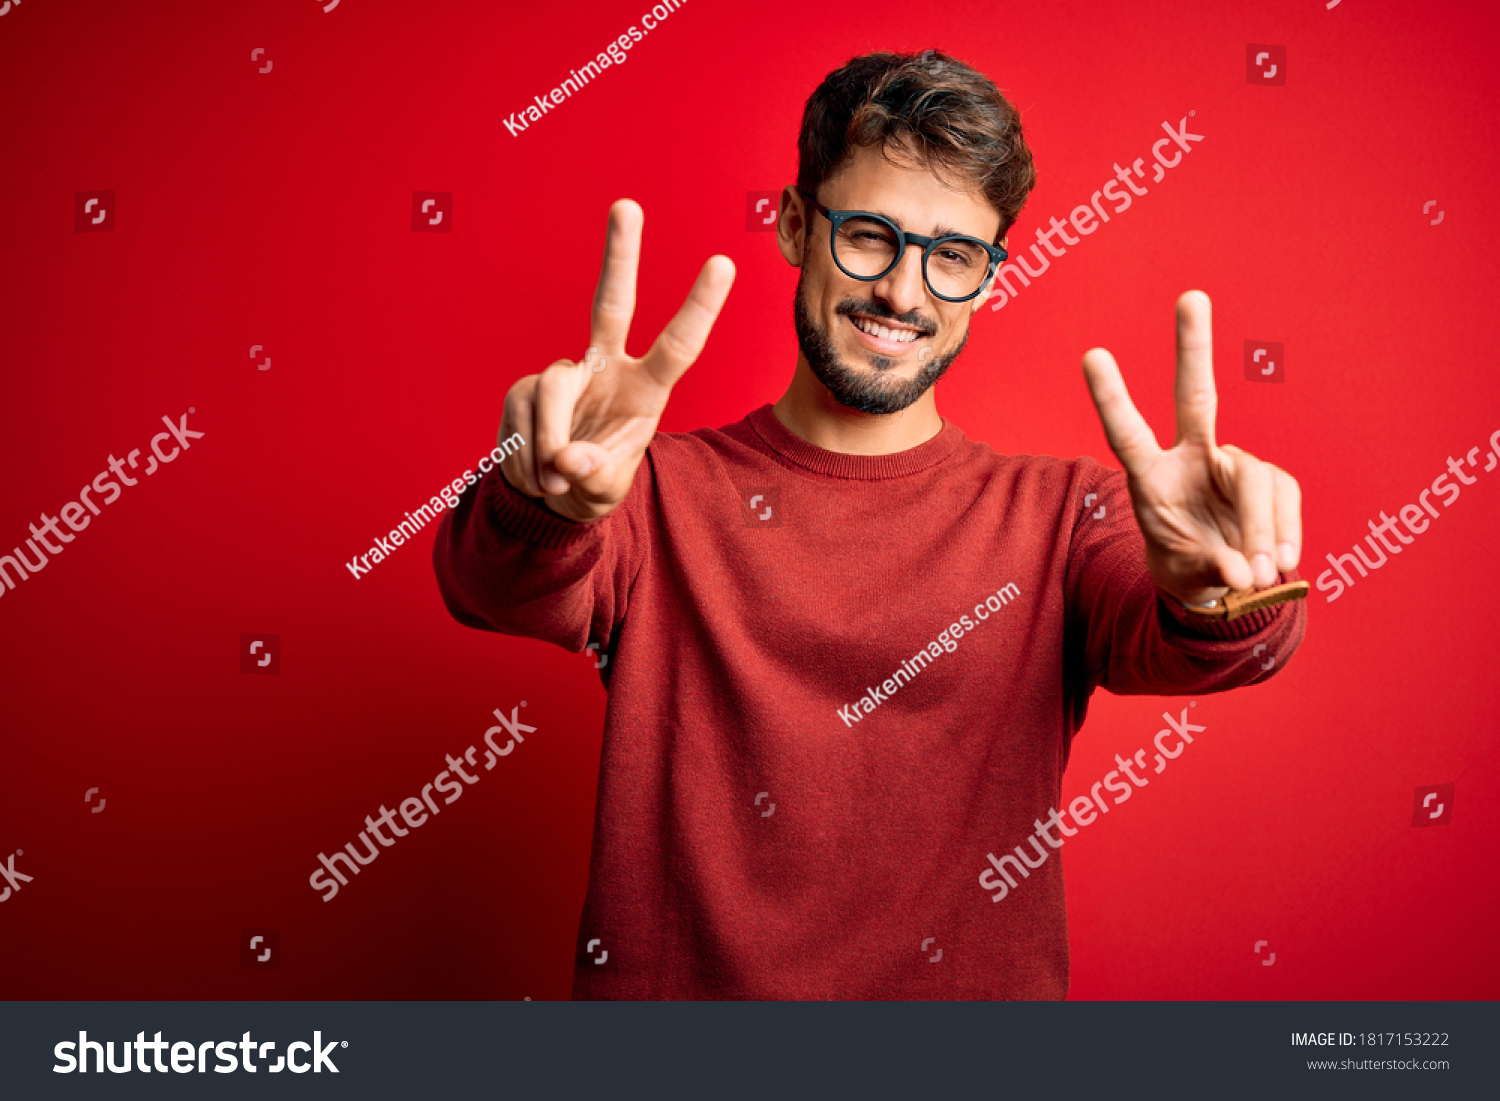 Young handsome man with beard wearing glasses and sweater standing over red background smiling with tongue out showing fingers of both hands doing victory sign. Number two. #1817153222